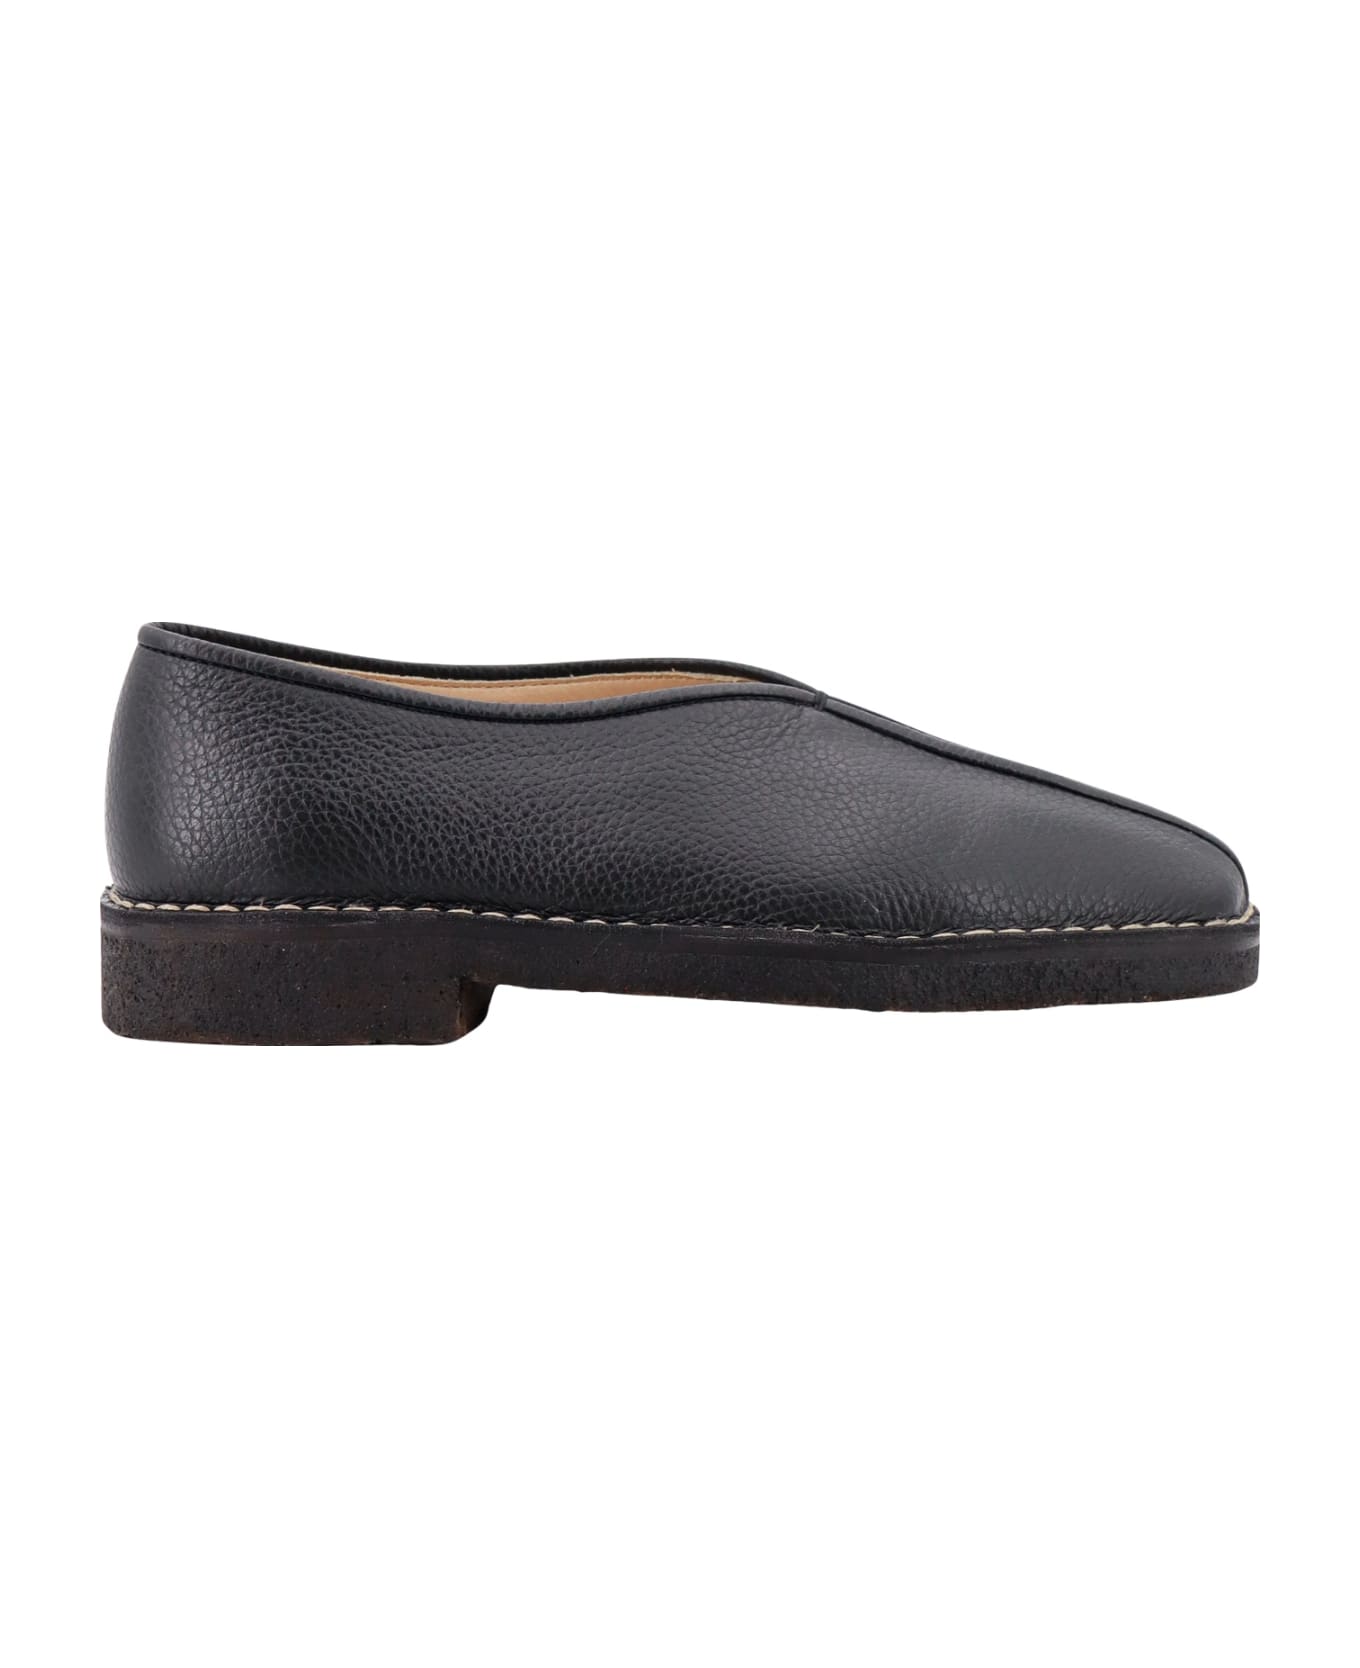 Lemaire Slippers - Black